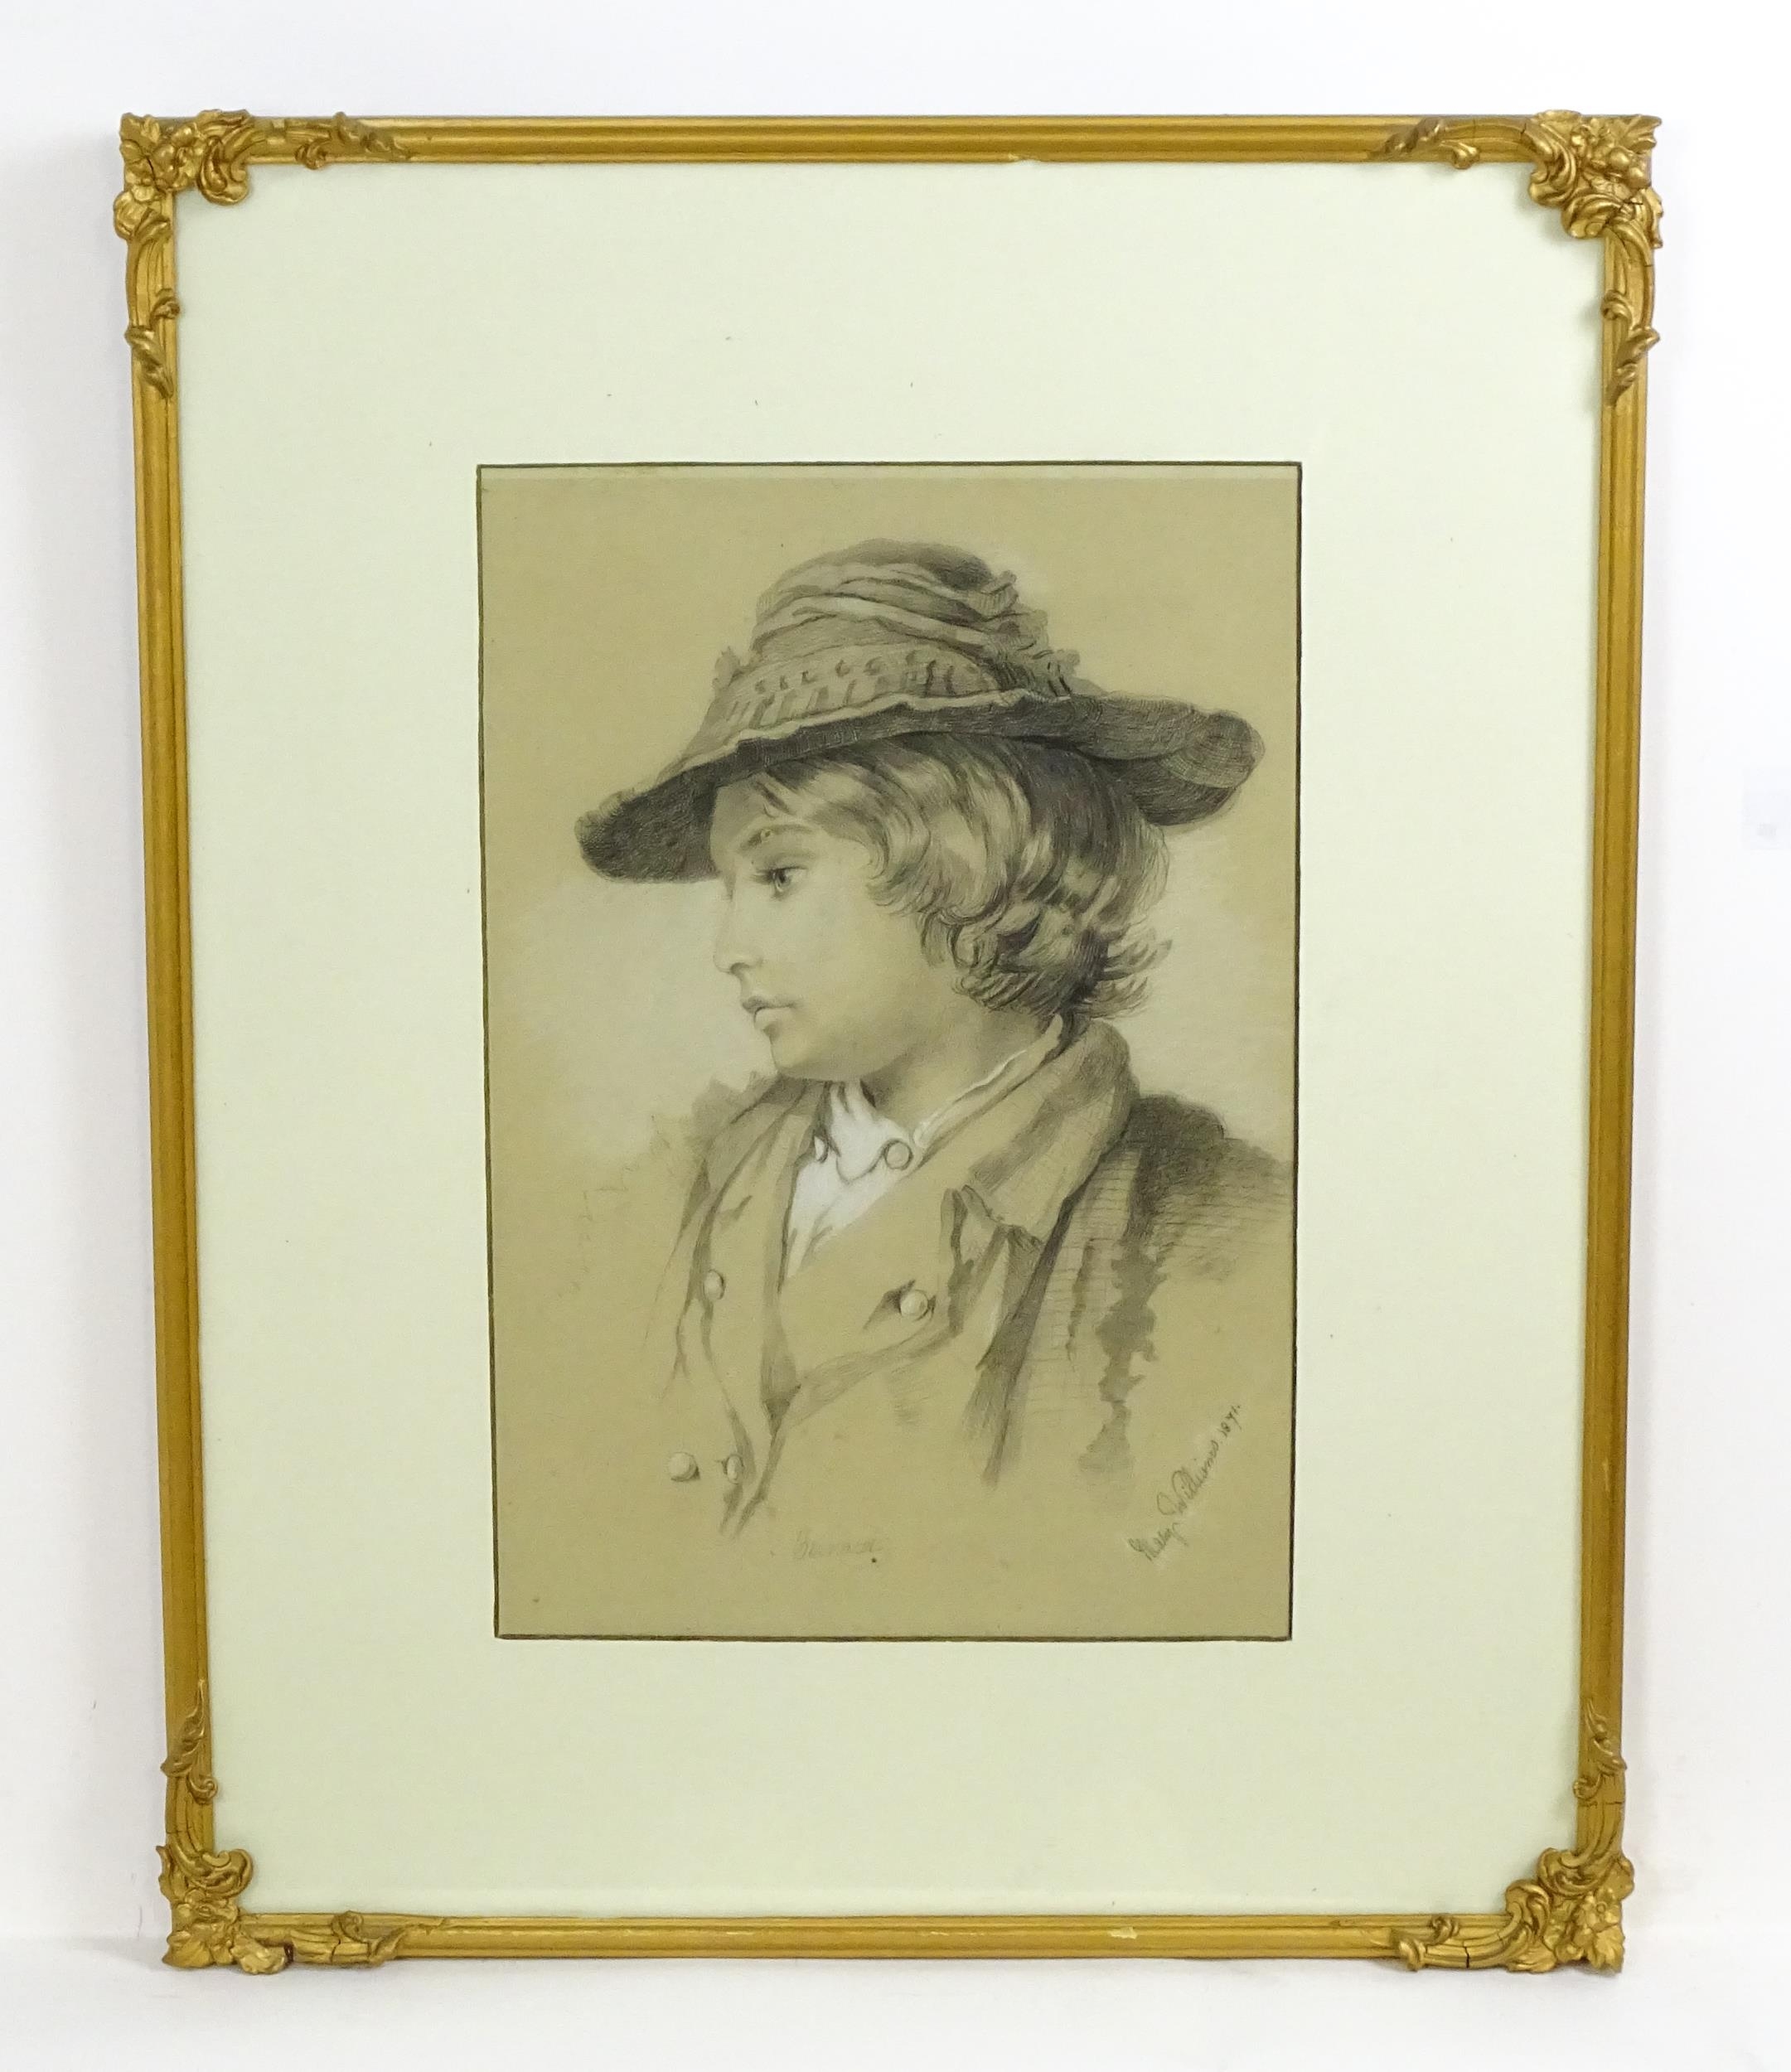 Mary Williams, 19th century, Pastel on paper, A portrait of a young boy in a hat. Signed and dated